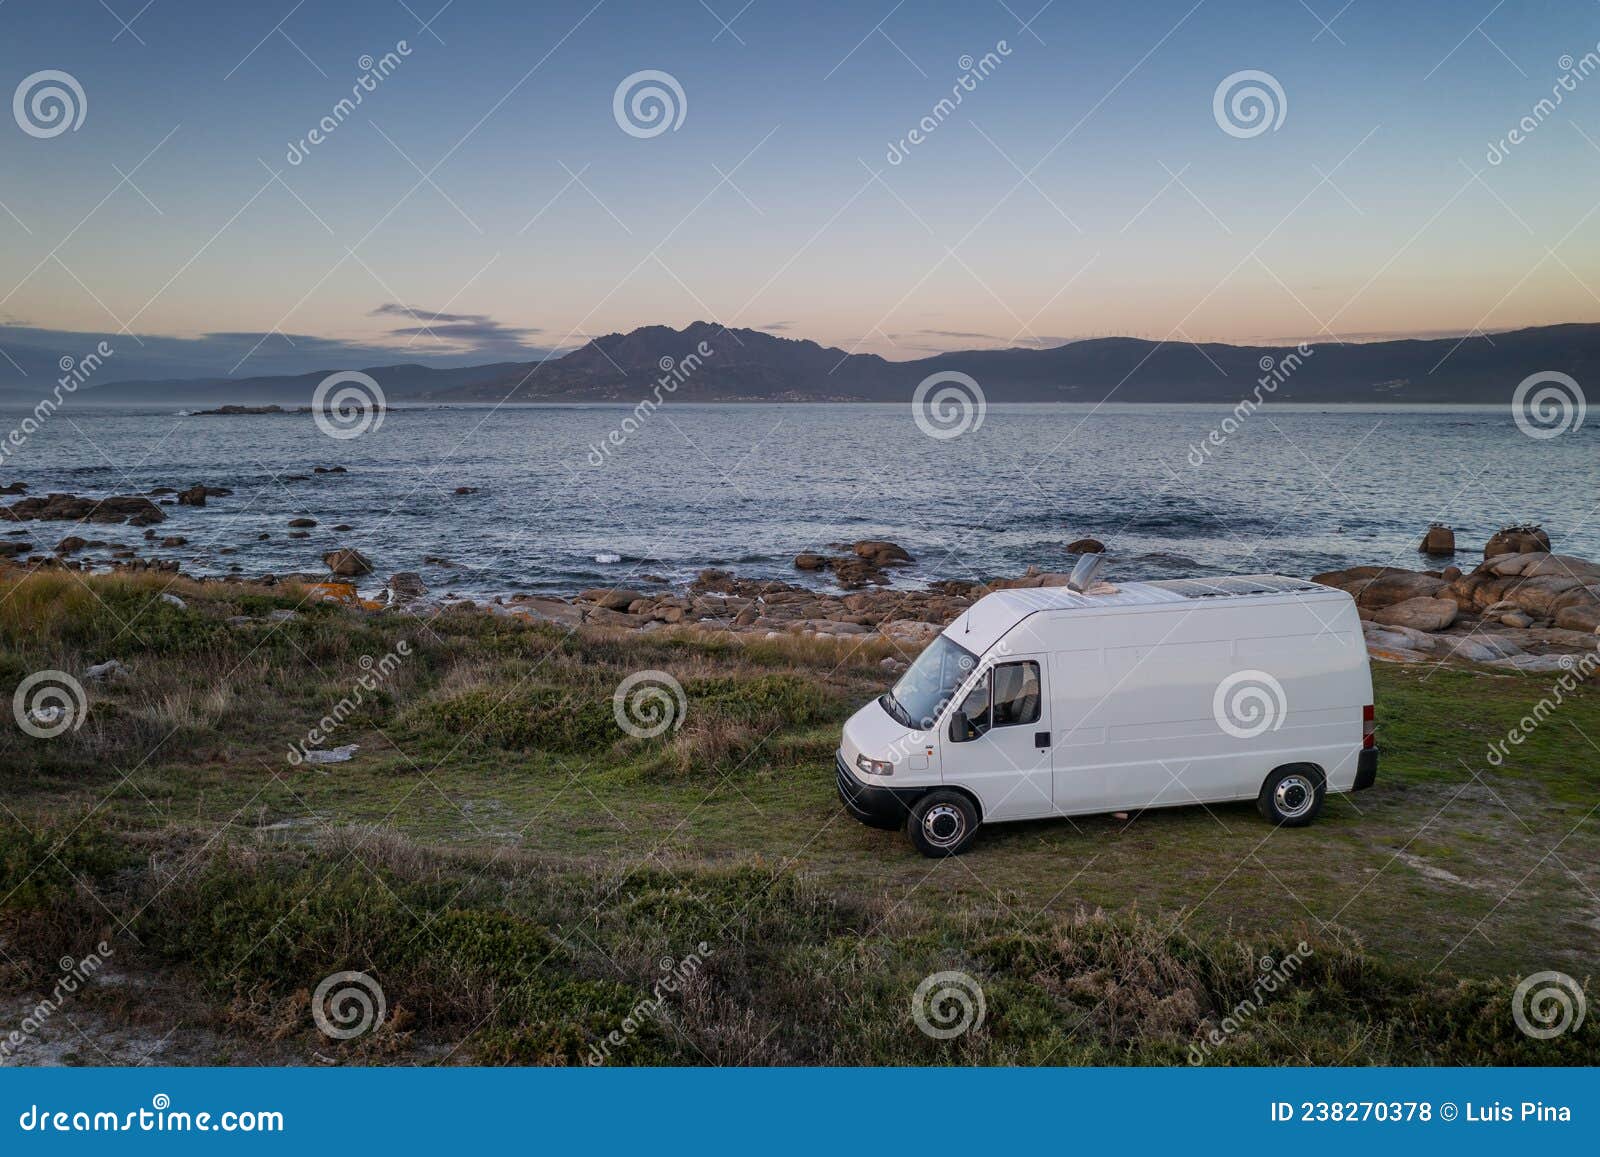 camper van motorhome with solar panels drone aerial view on a sea landscape with mountains living van life in galiza, spain